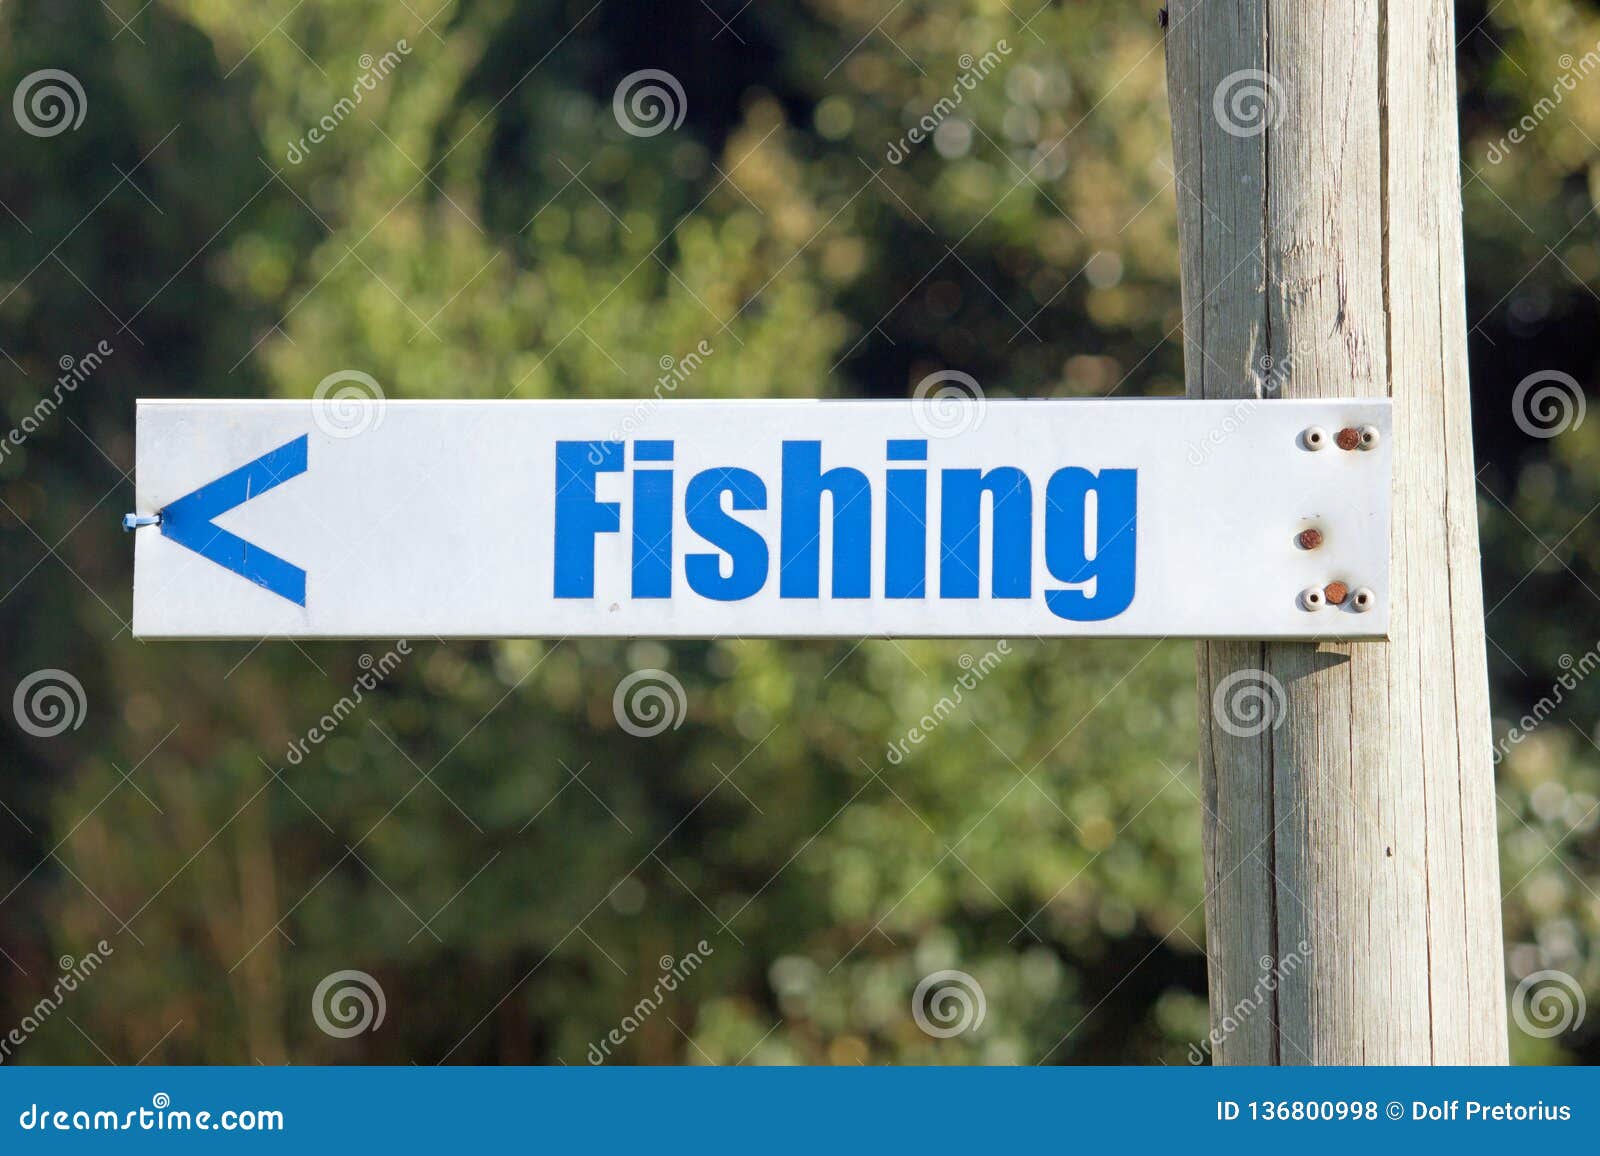 Sign To Show Direction To Fishing Stock Photo - Image of left